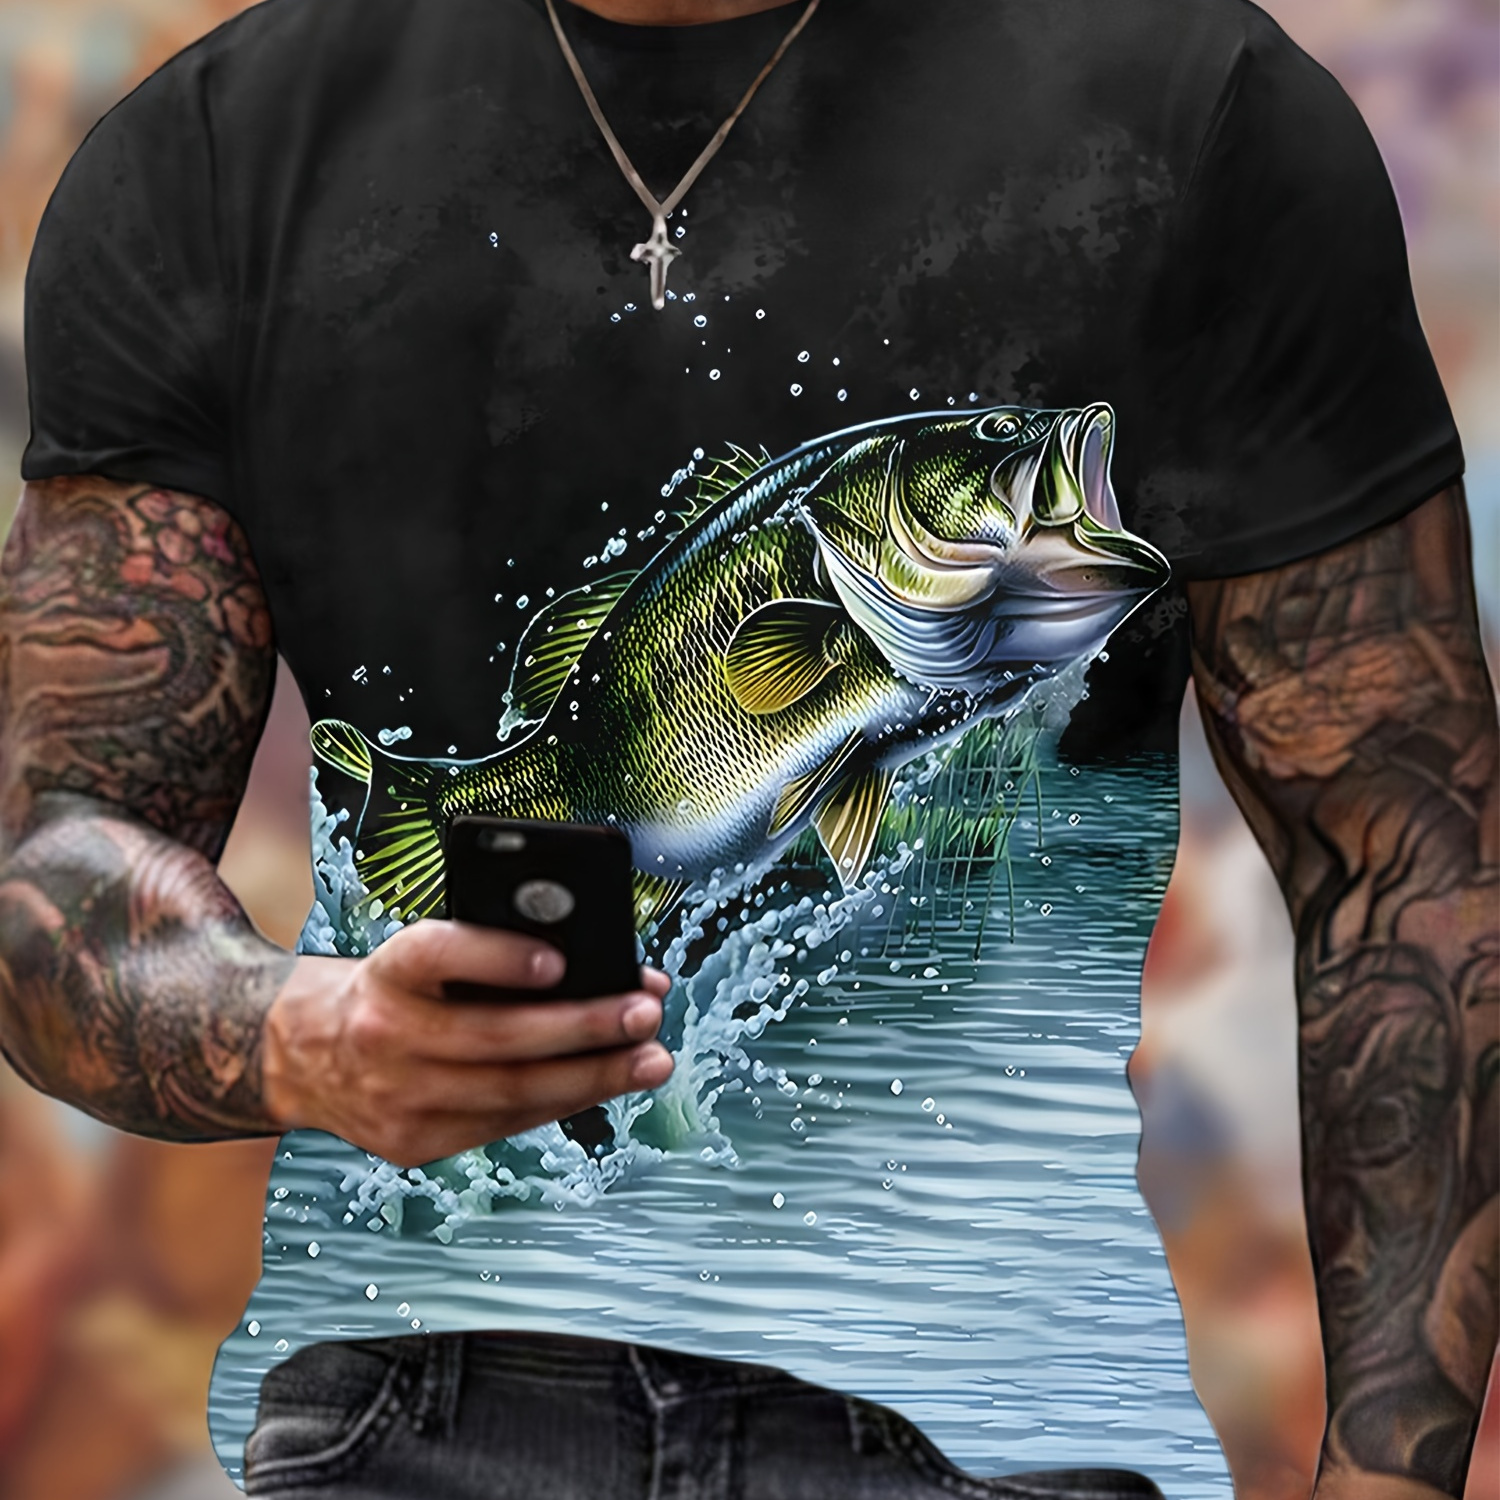 

Men's Stylish Fish Pattern Shirt, Casual Slightly Stretch Breathable Crew Neck Short Sleeve Tee Top For City Walk Street Hanging Outdoor Activities